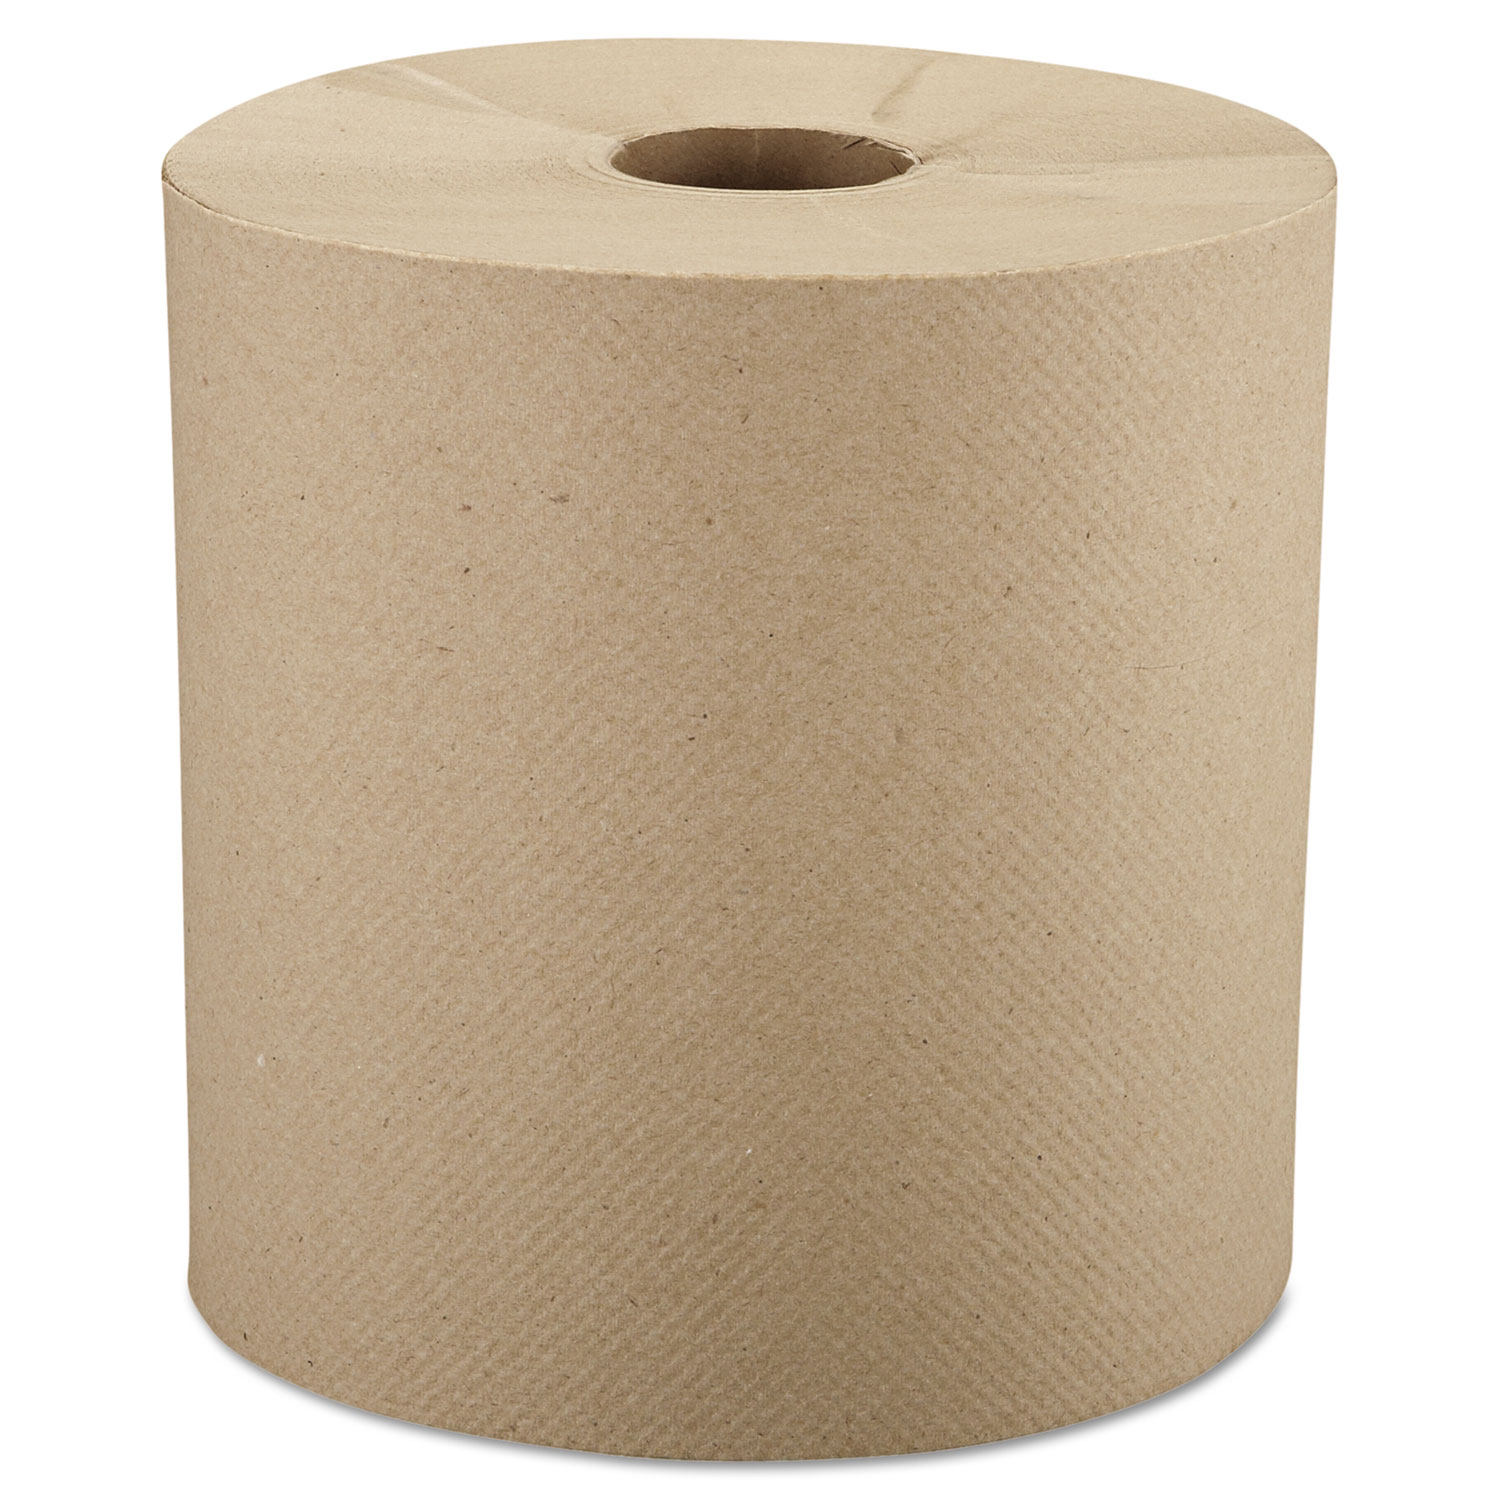 Nonperforated Roll Towels, 8" x 800ft, Brown, 6 Rolls/Carton